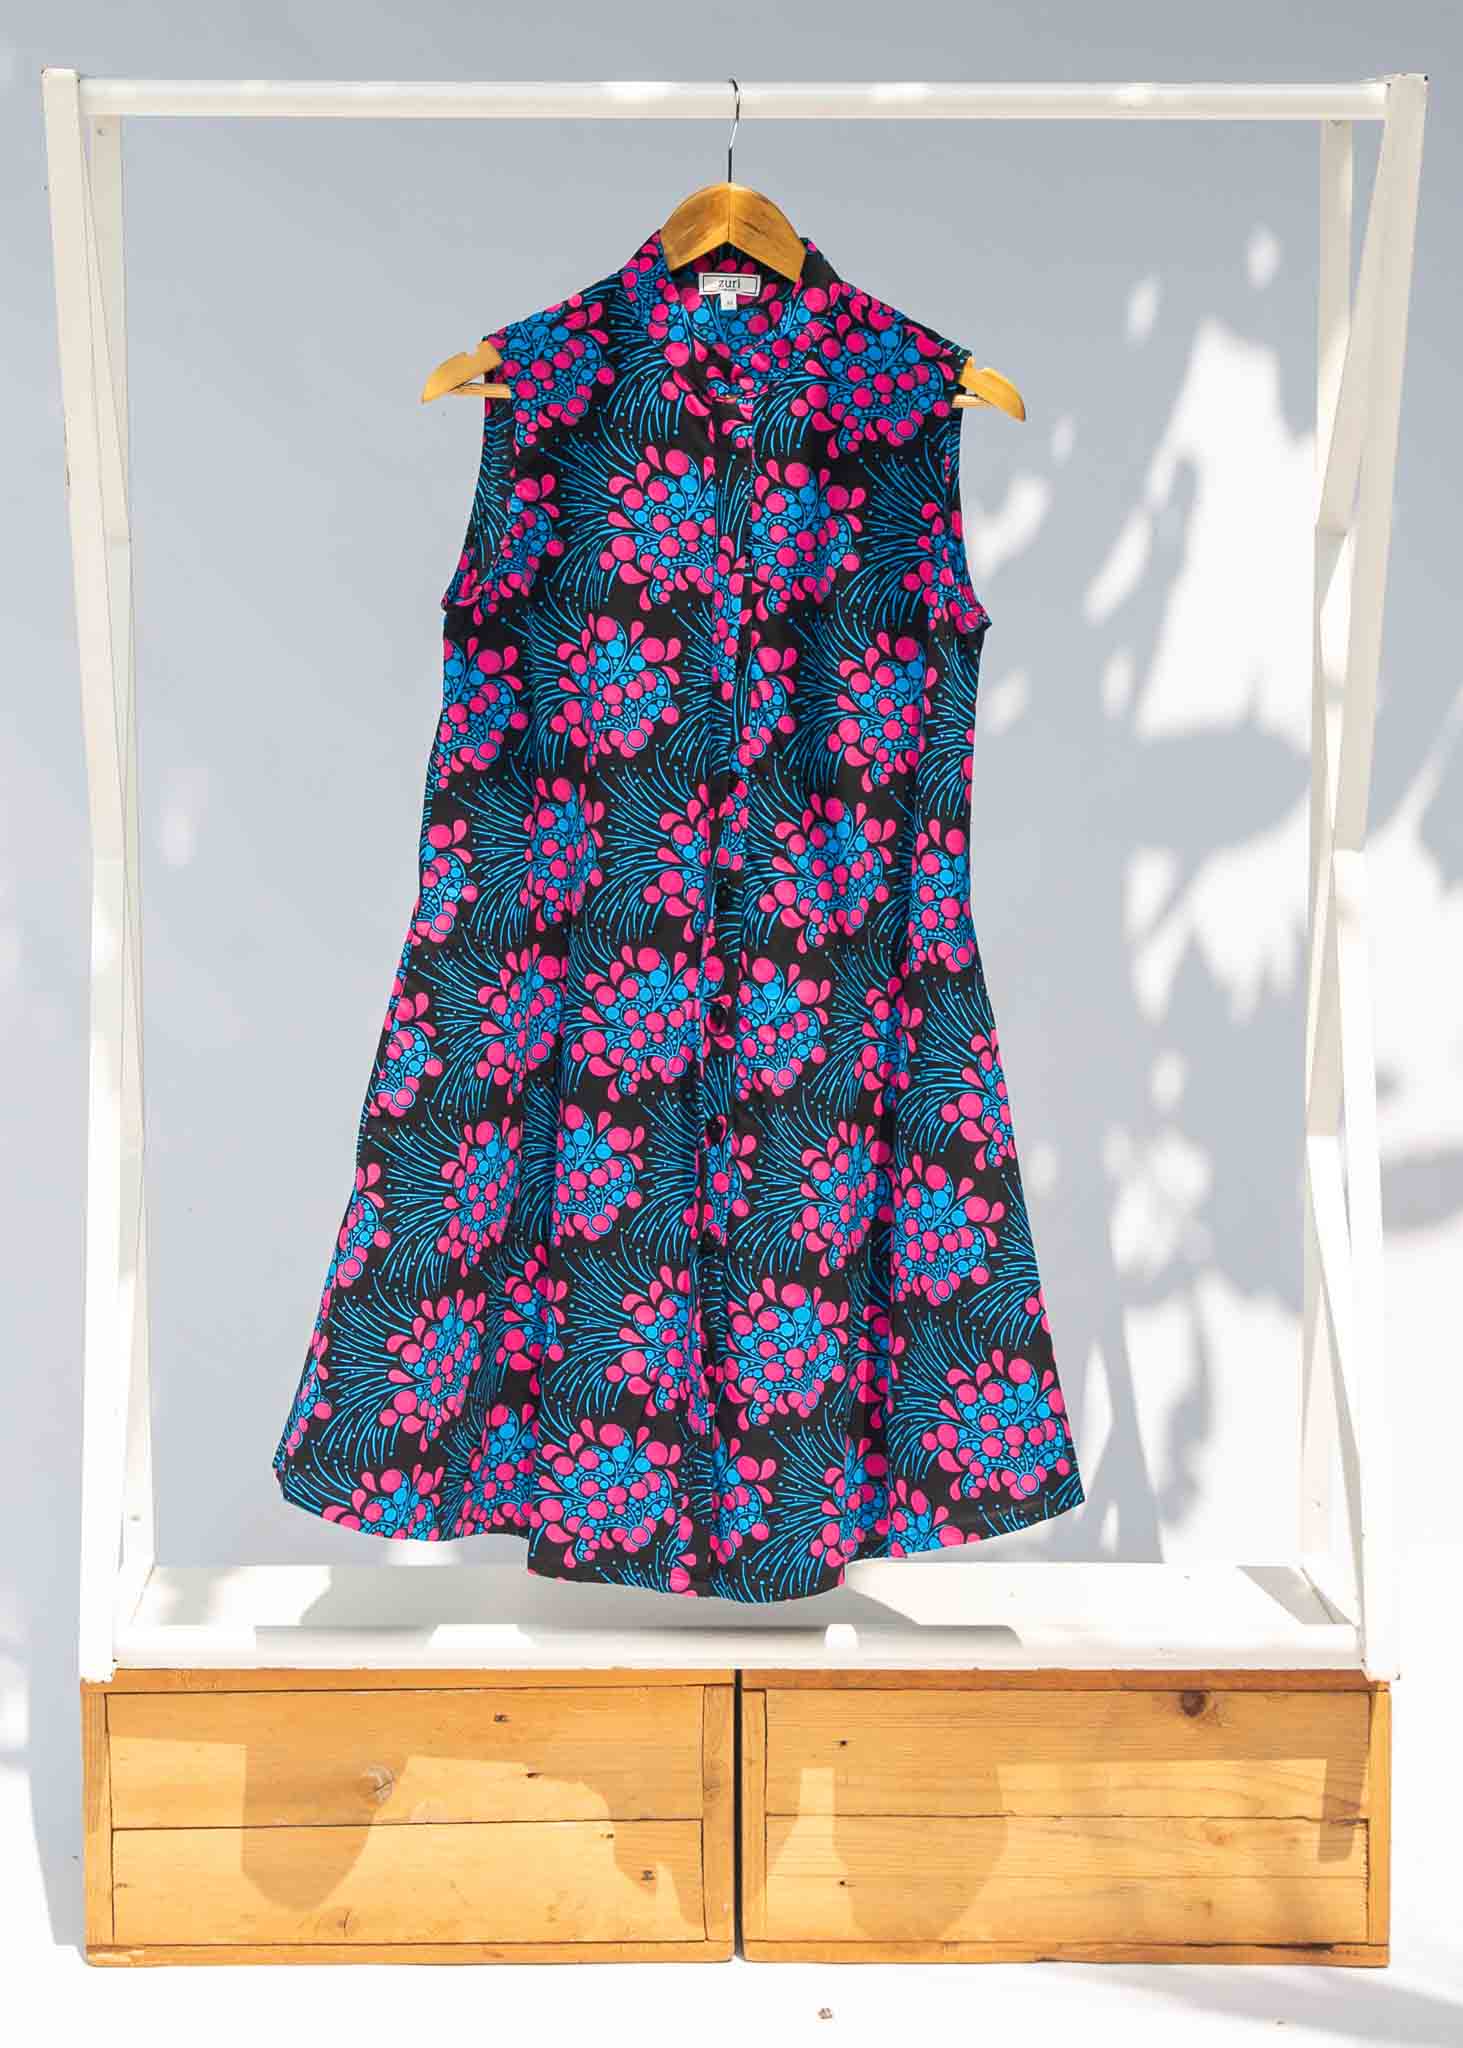 Display of black sleeveless dress with blue and pink poppy print.